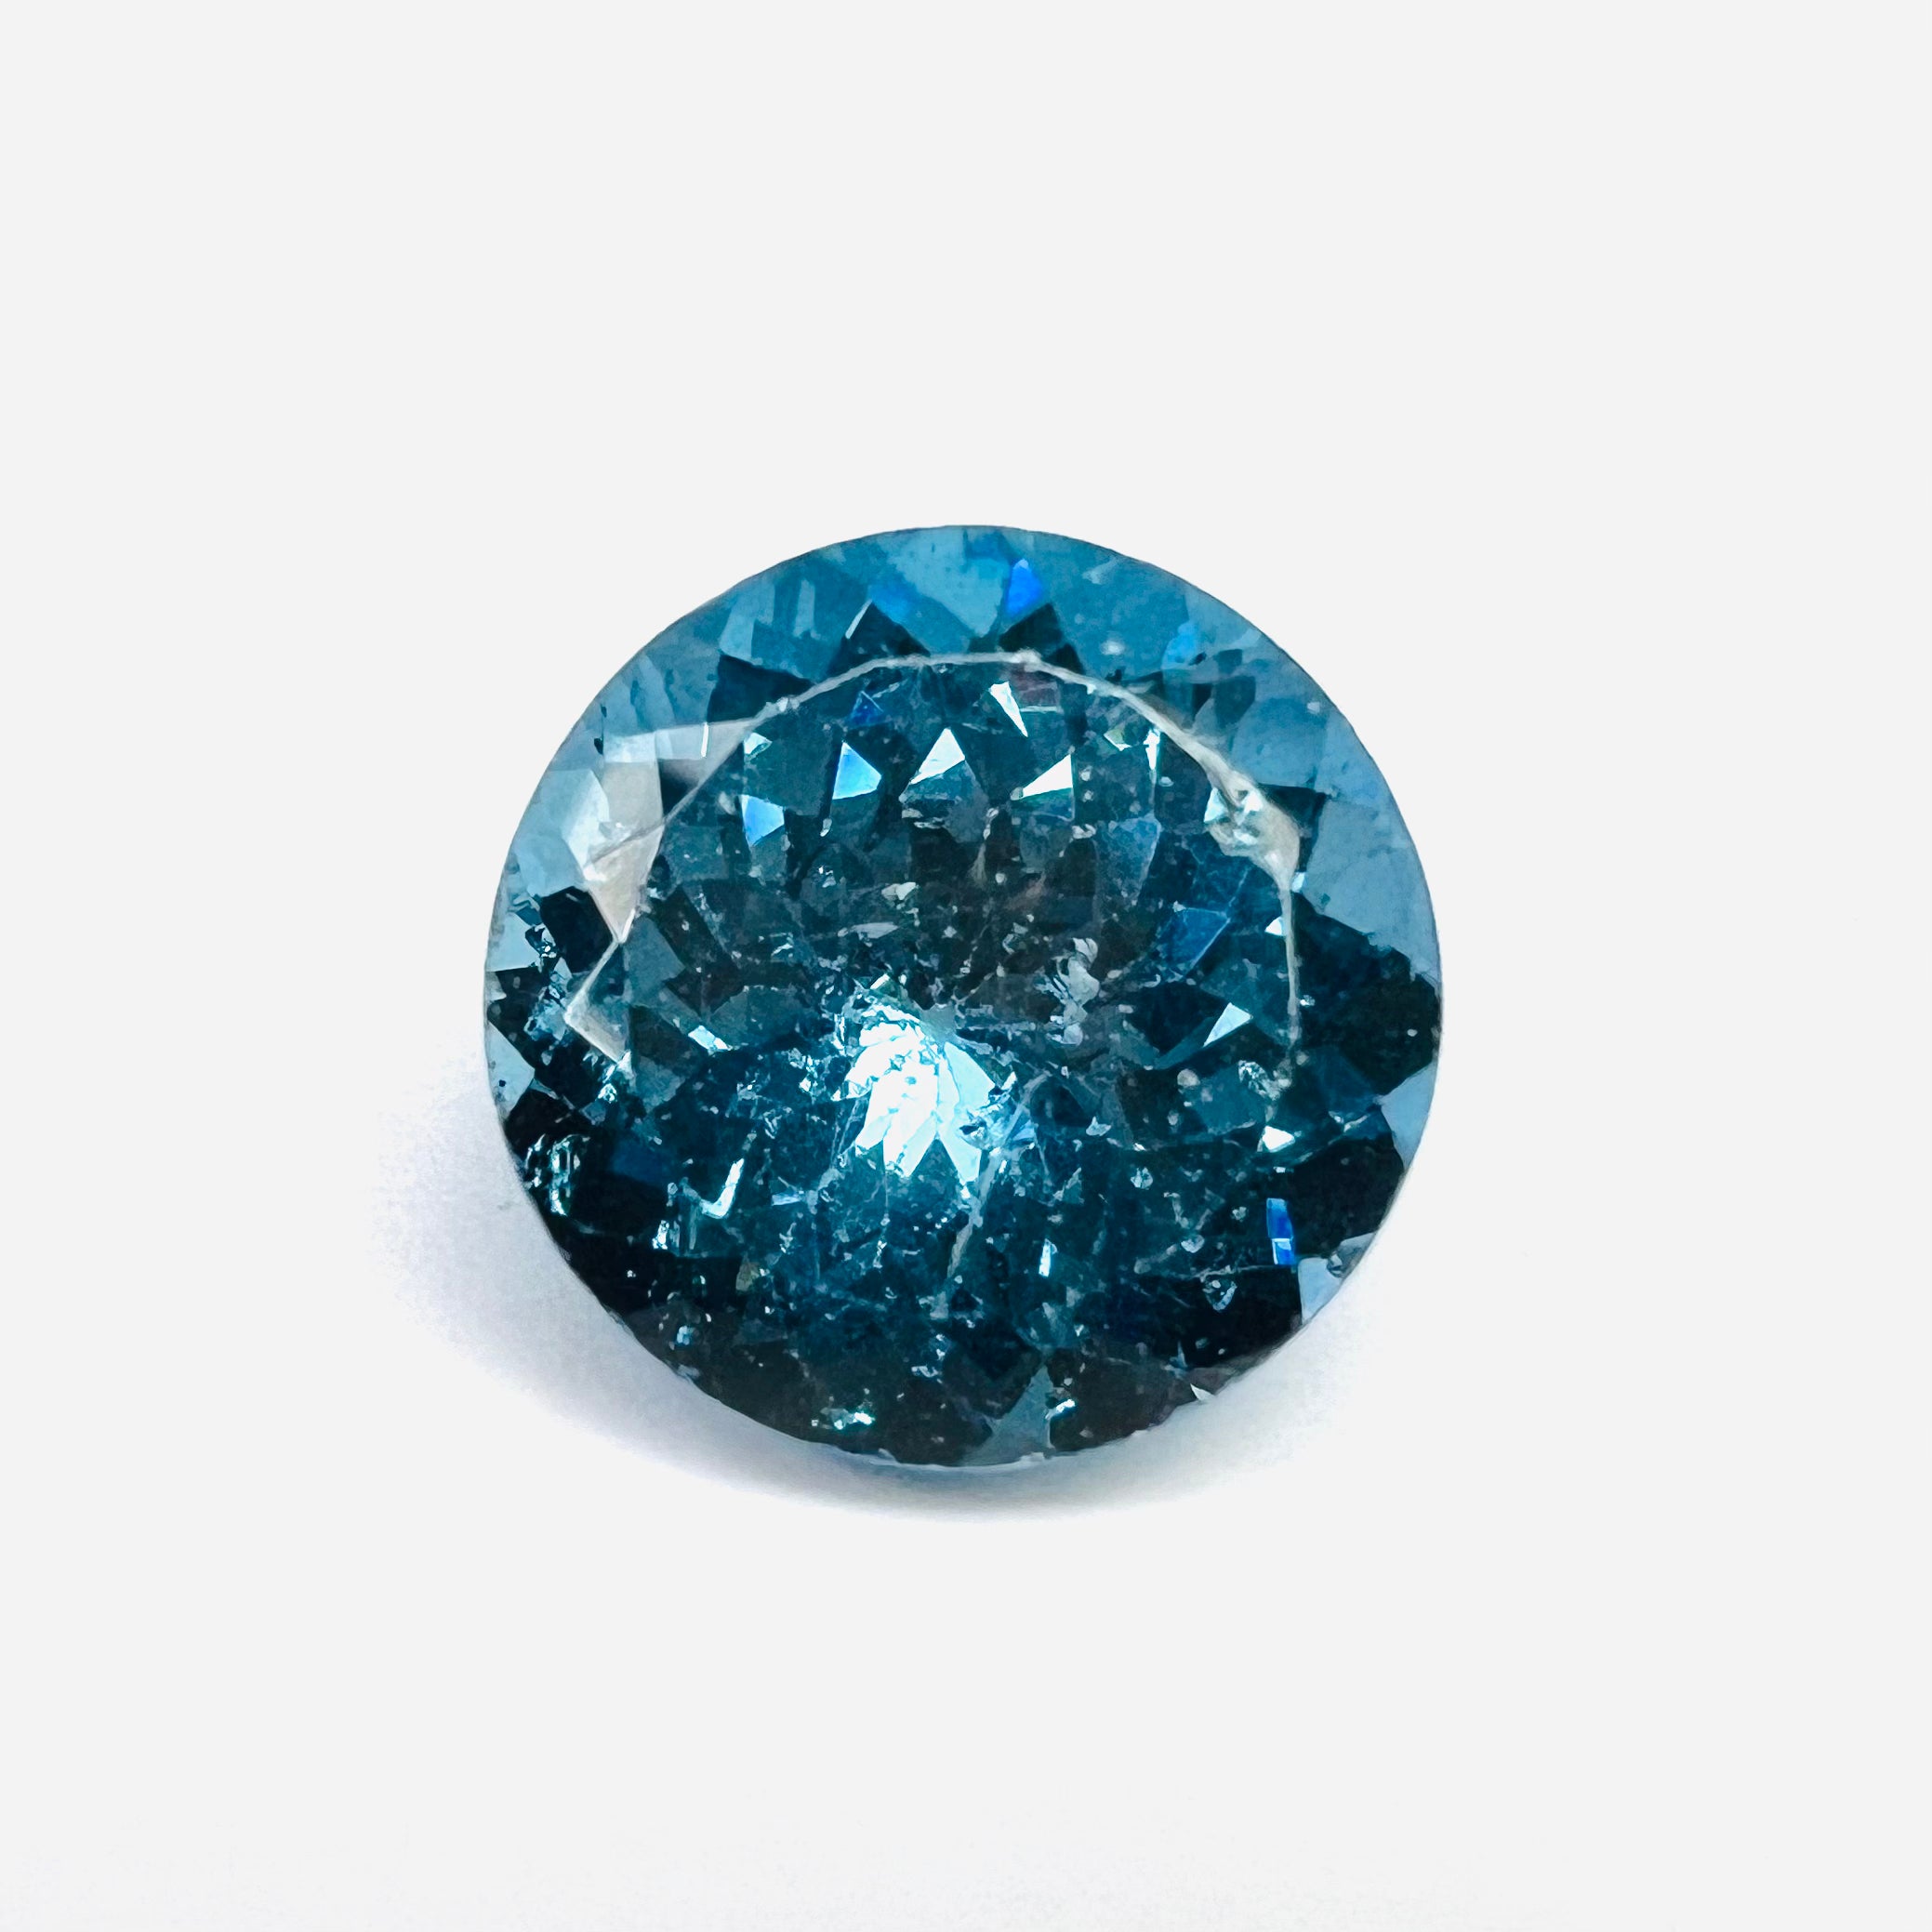 17.7CTW Loose Natural Round Cut Topaz 15.06x9.55mm Earth mined Gemstone